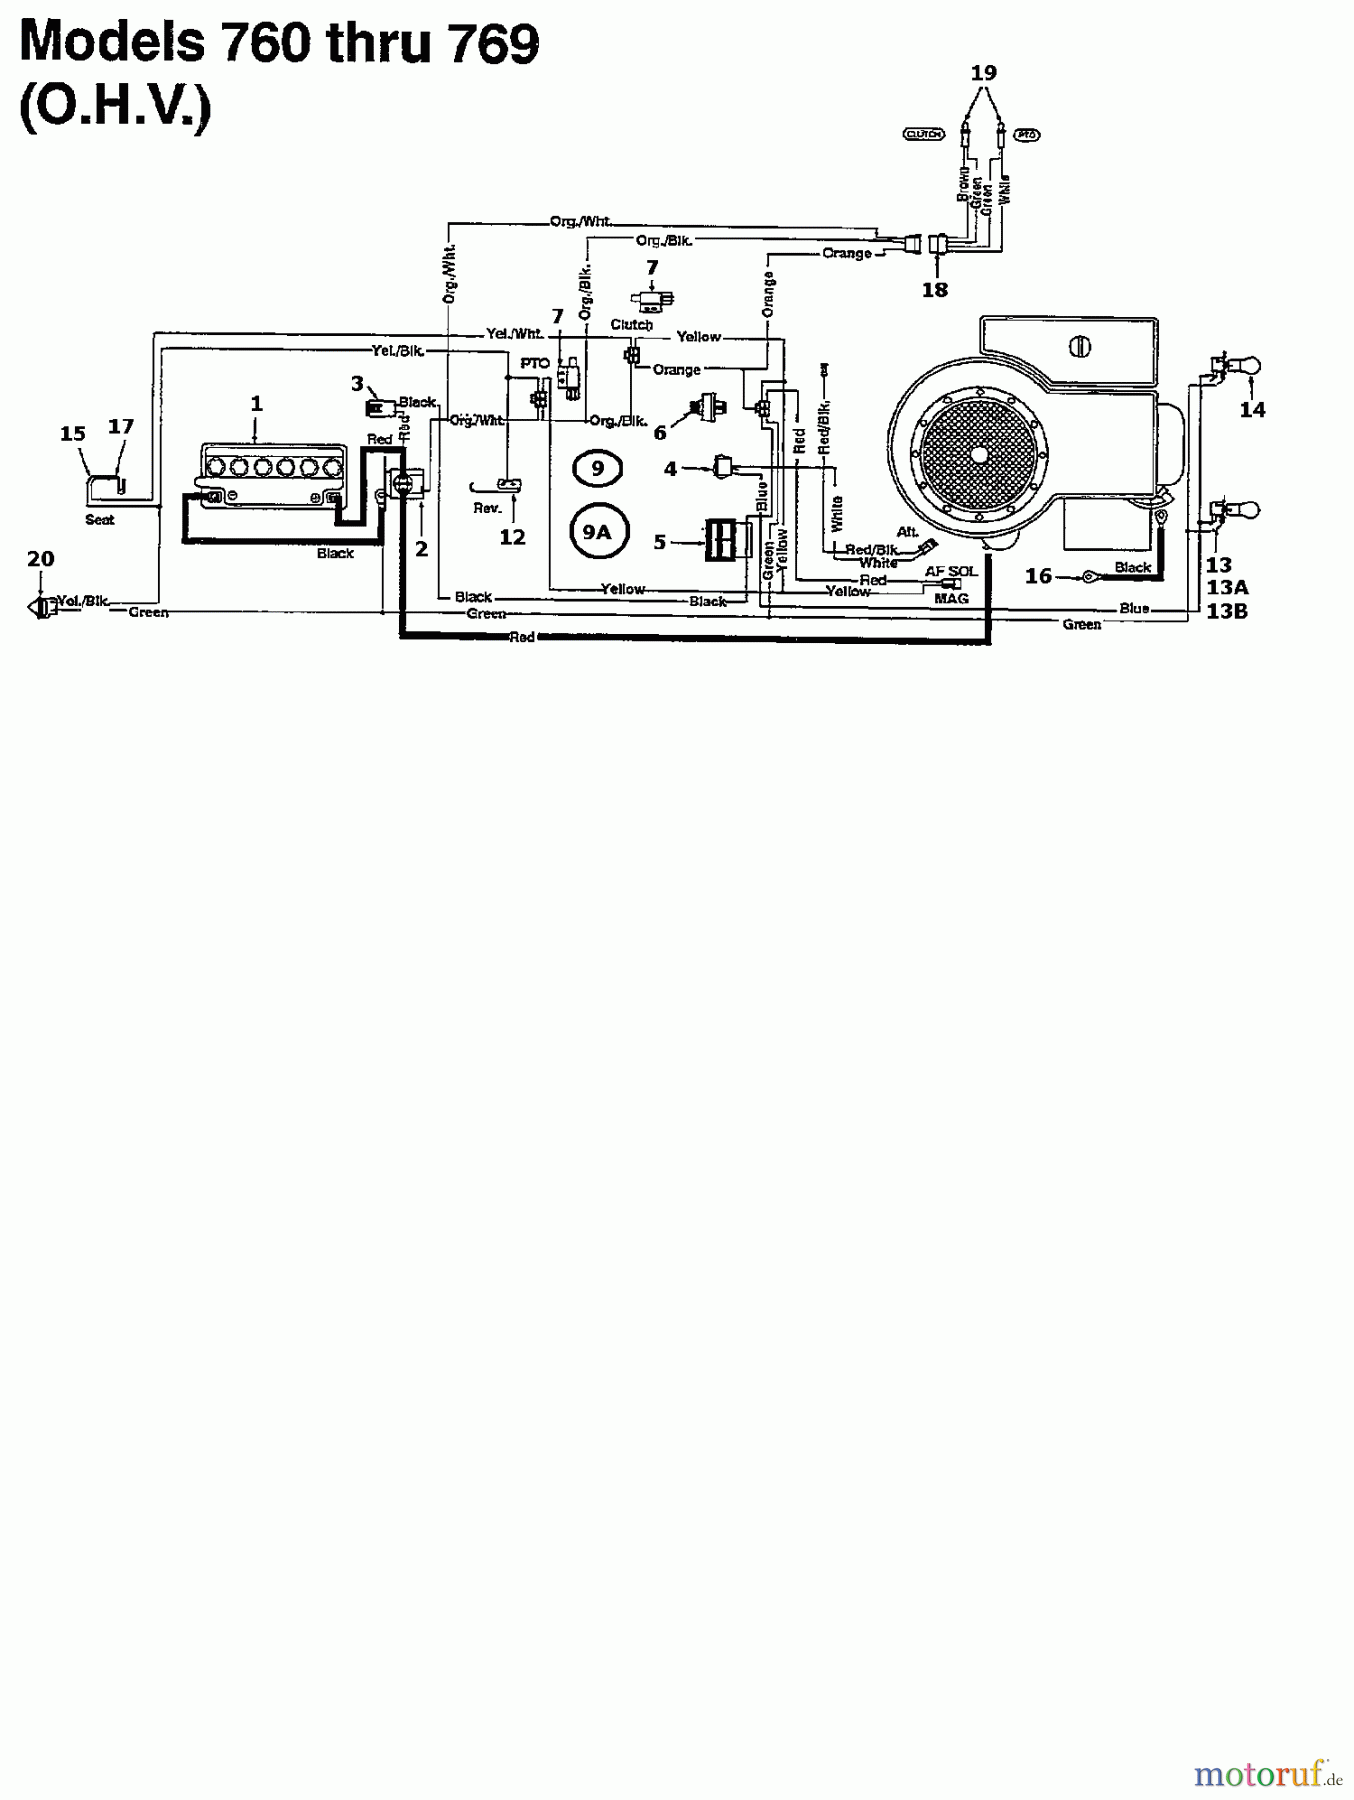  Columbia Lawn tractors 160/102 135T761N626  (1995) Wiring diagram for O.H.V.